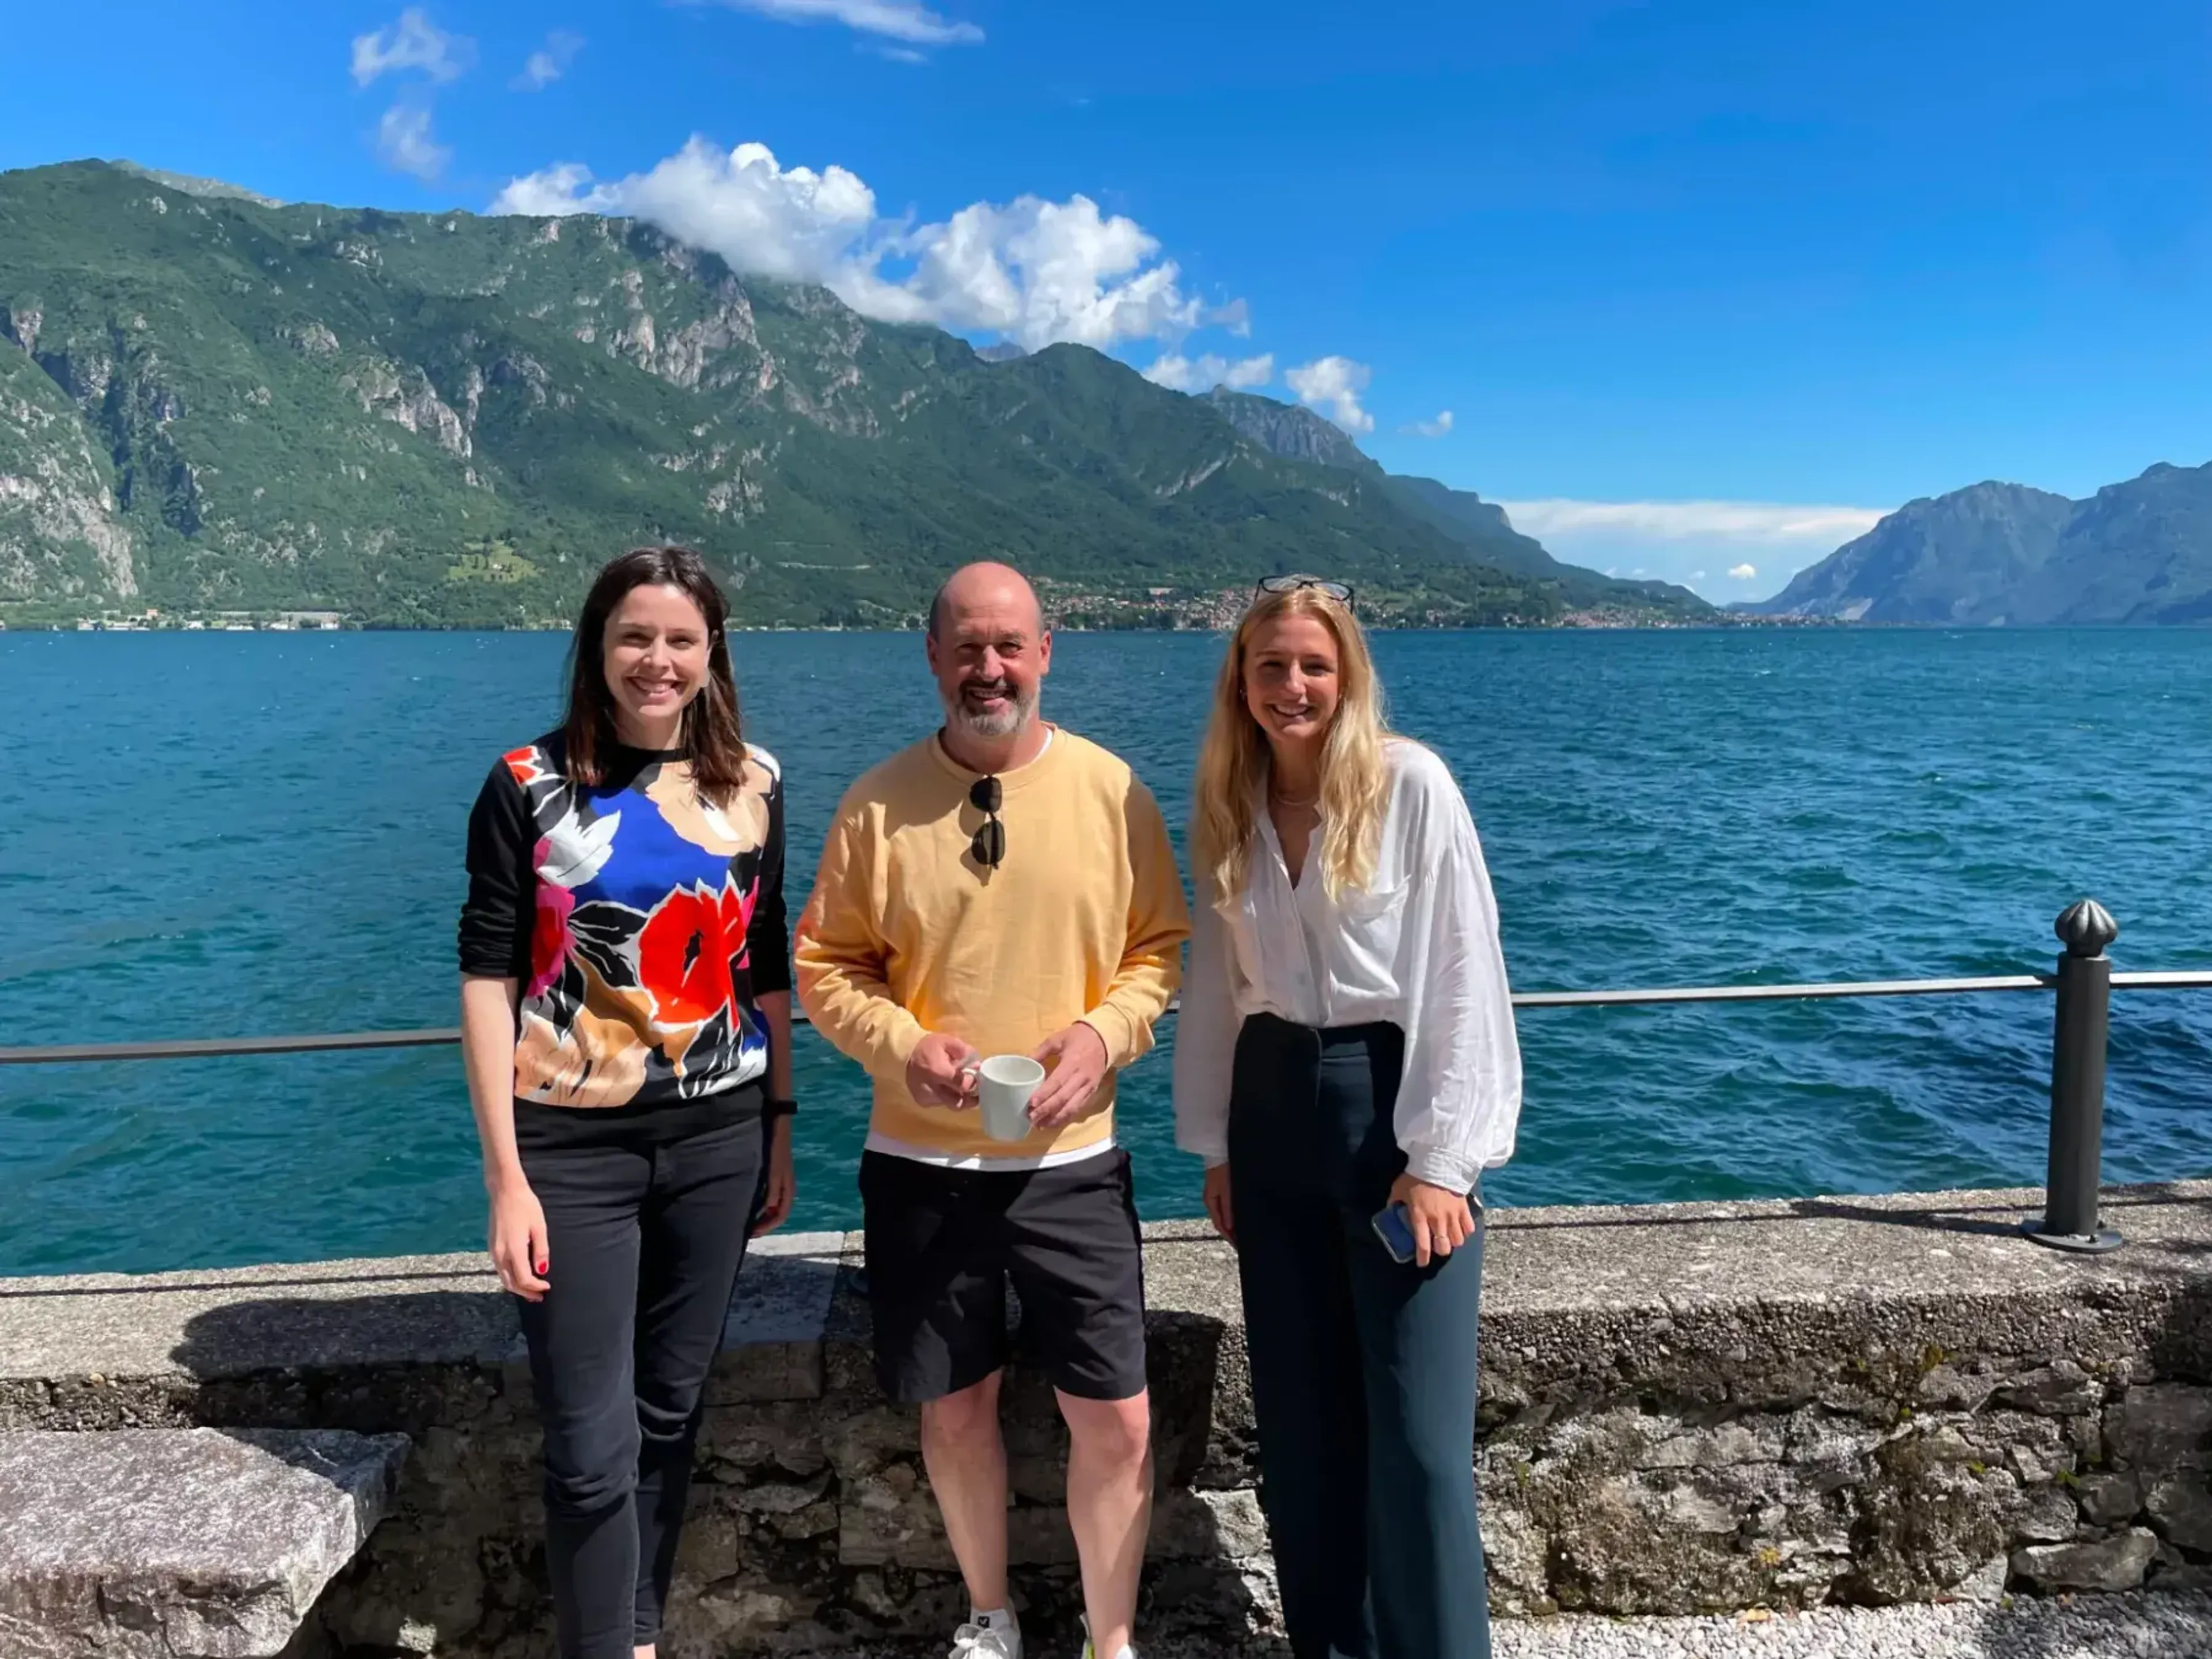 Emily, Mike and Philippa at the Rockefeller Bellagio Center, Italy, in June